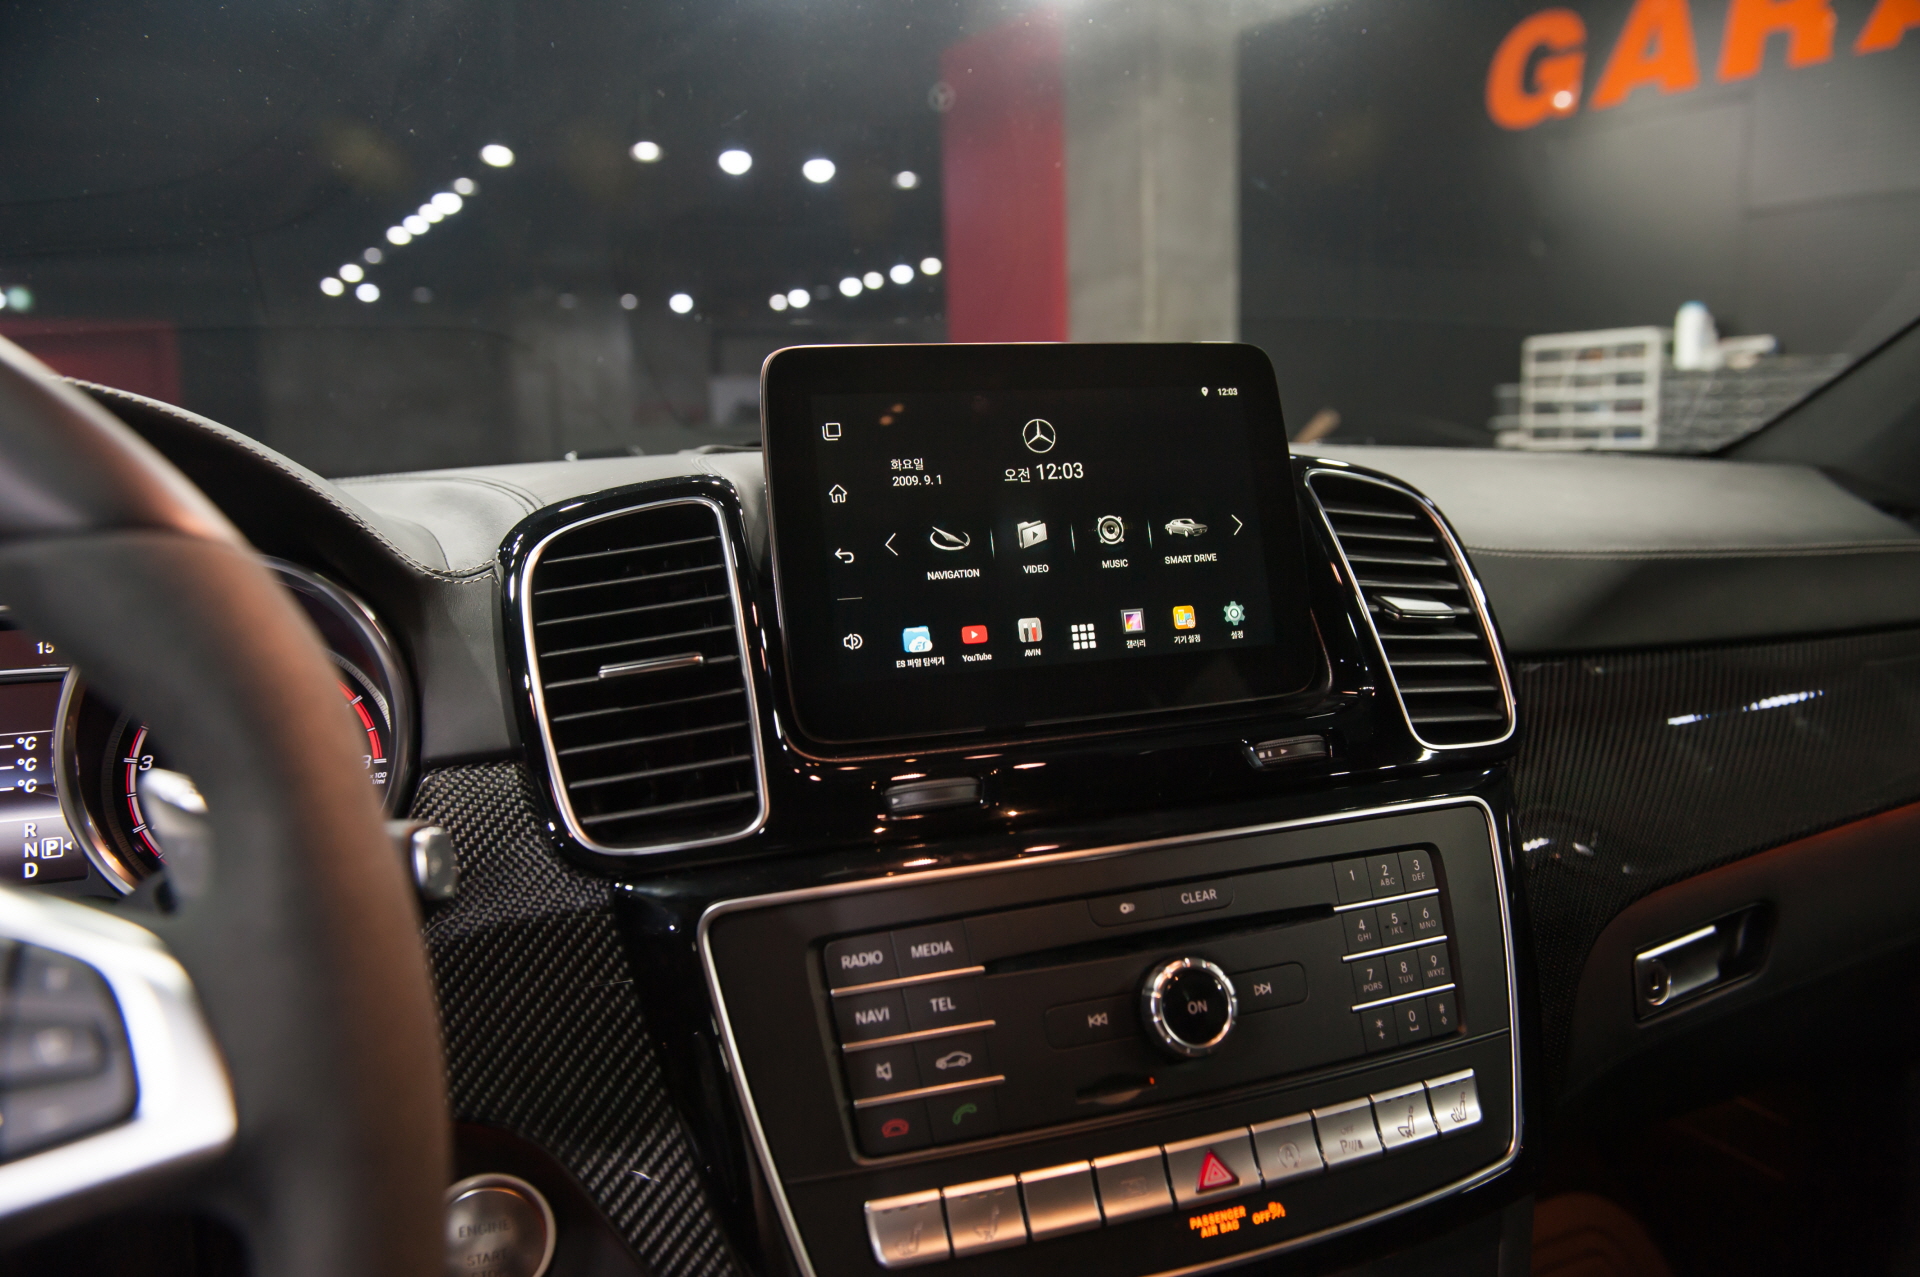 Android System for 2017 Mercedes C292 GLE-Class "A-LINK"